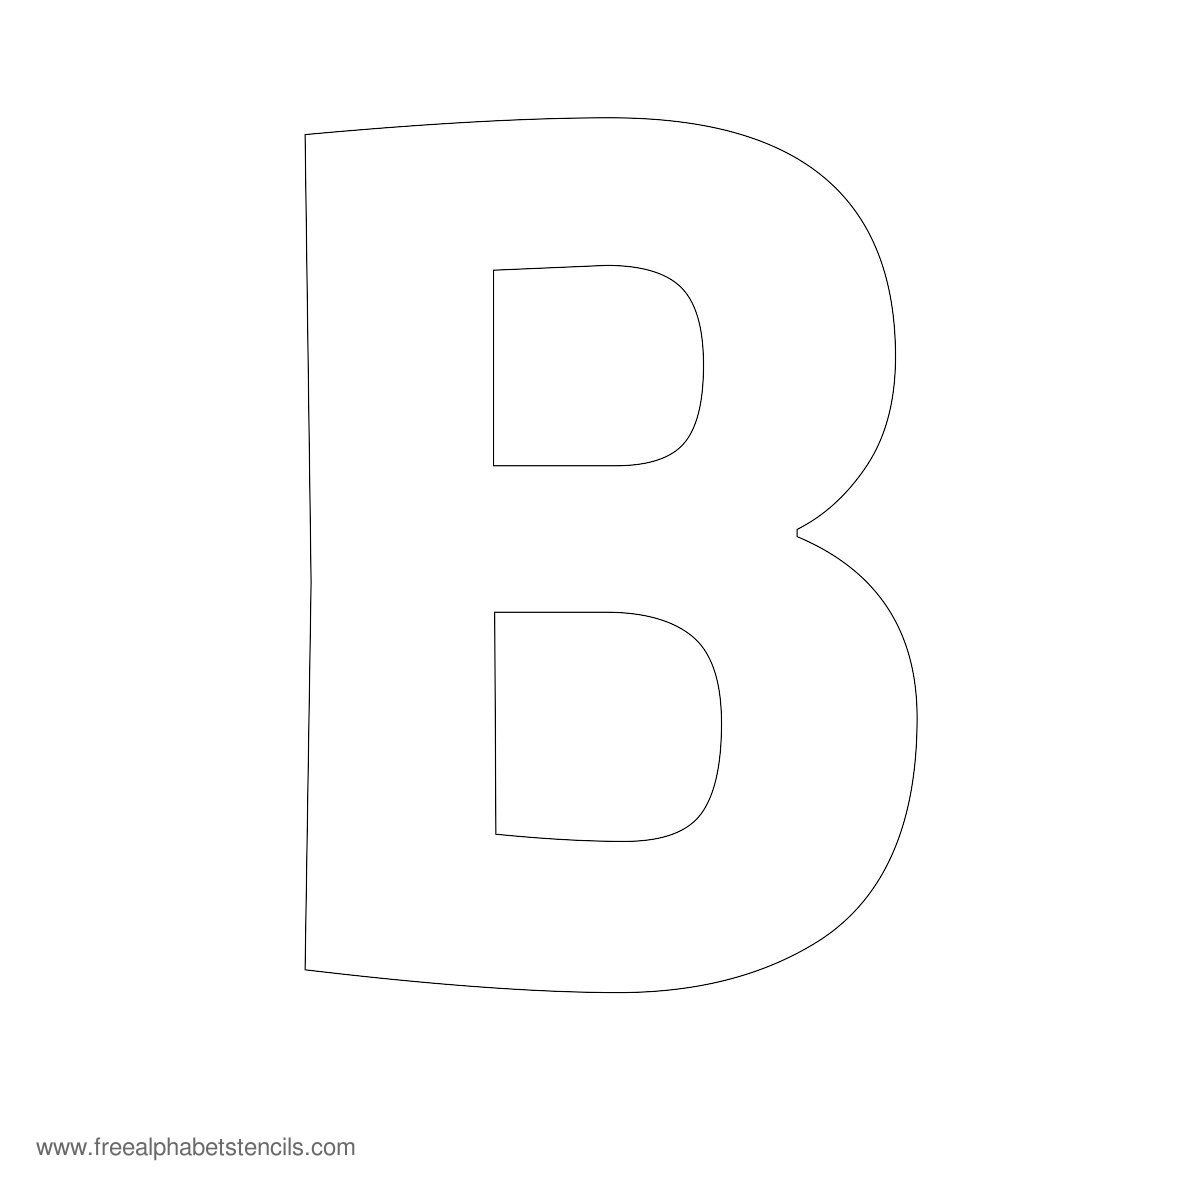 free-pr-ntable-abc-color-ng-pages-small-and-large-letters-the